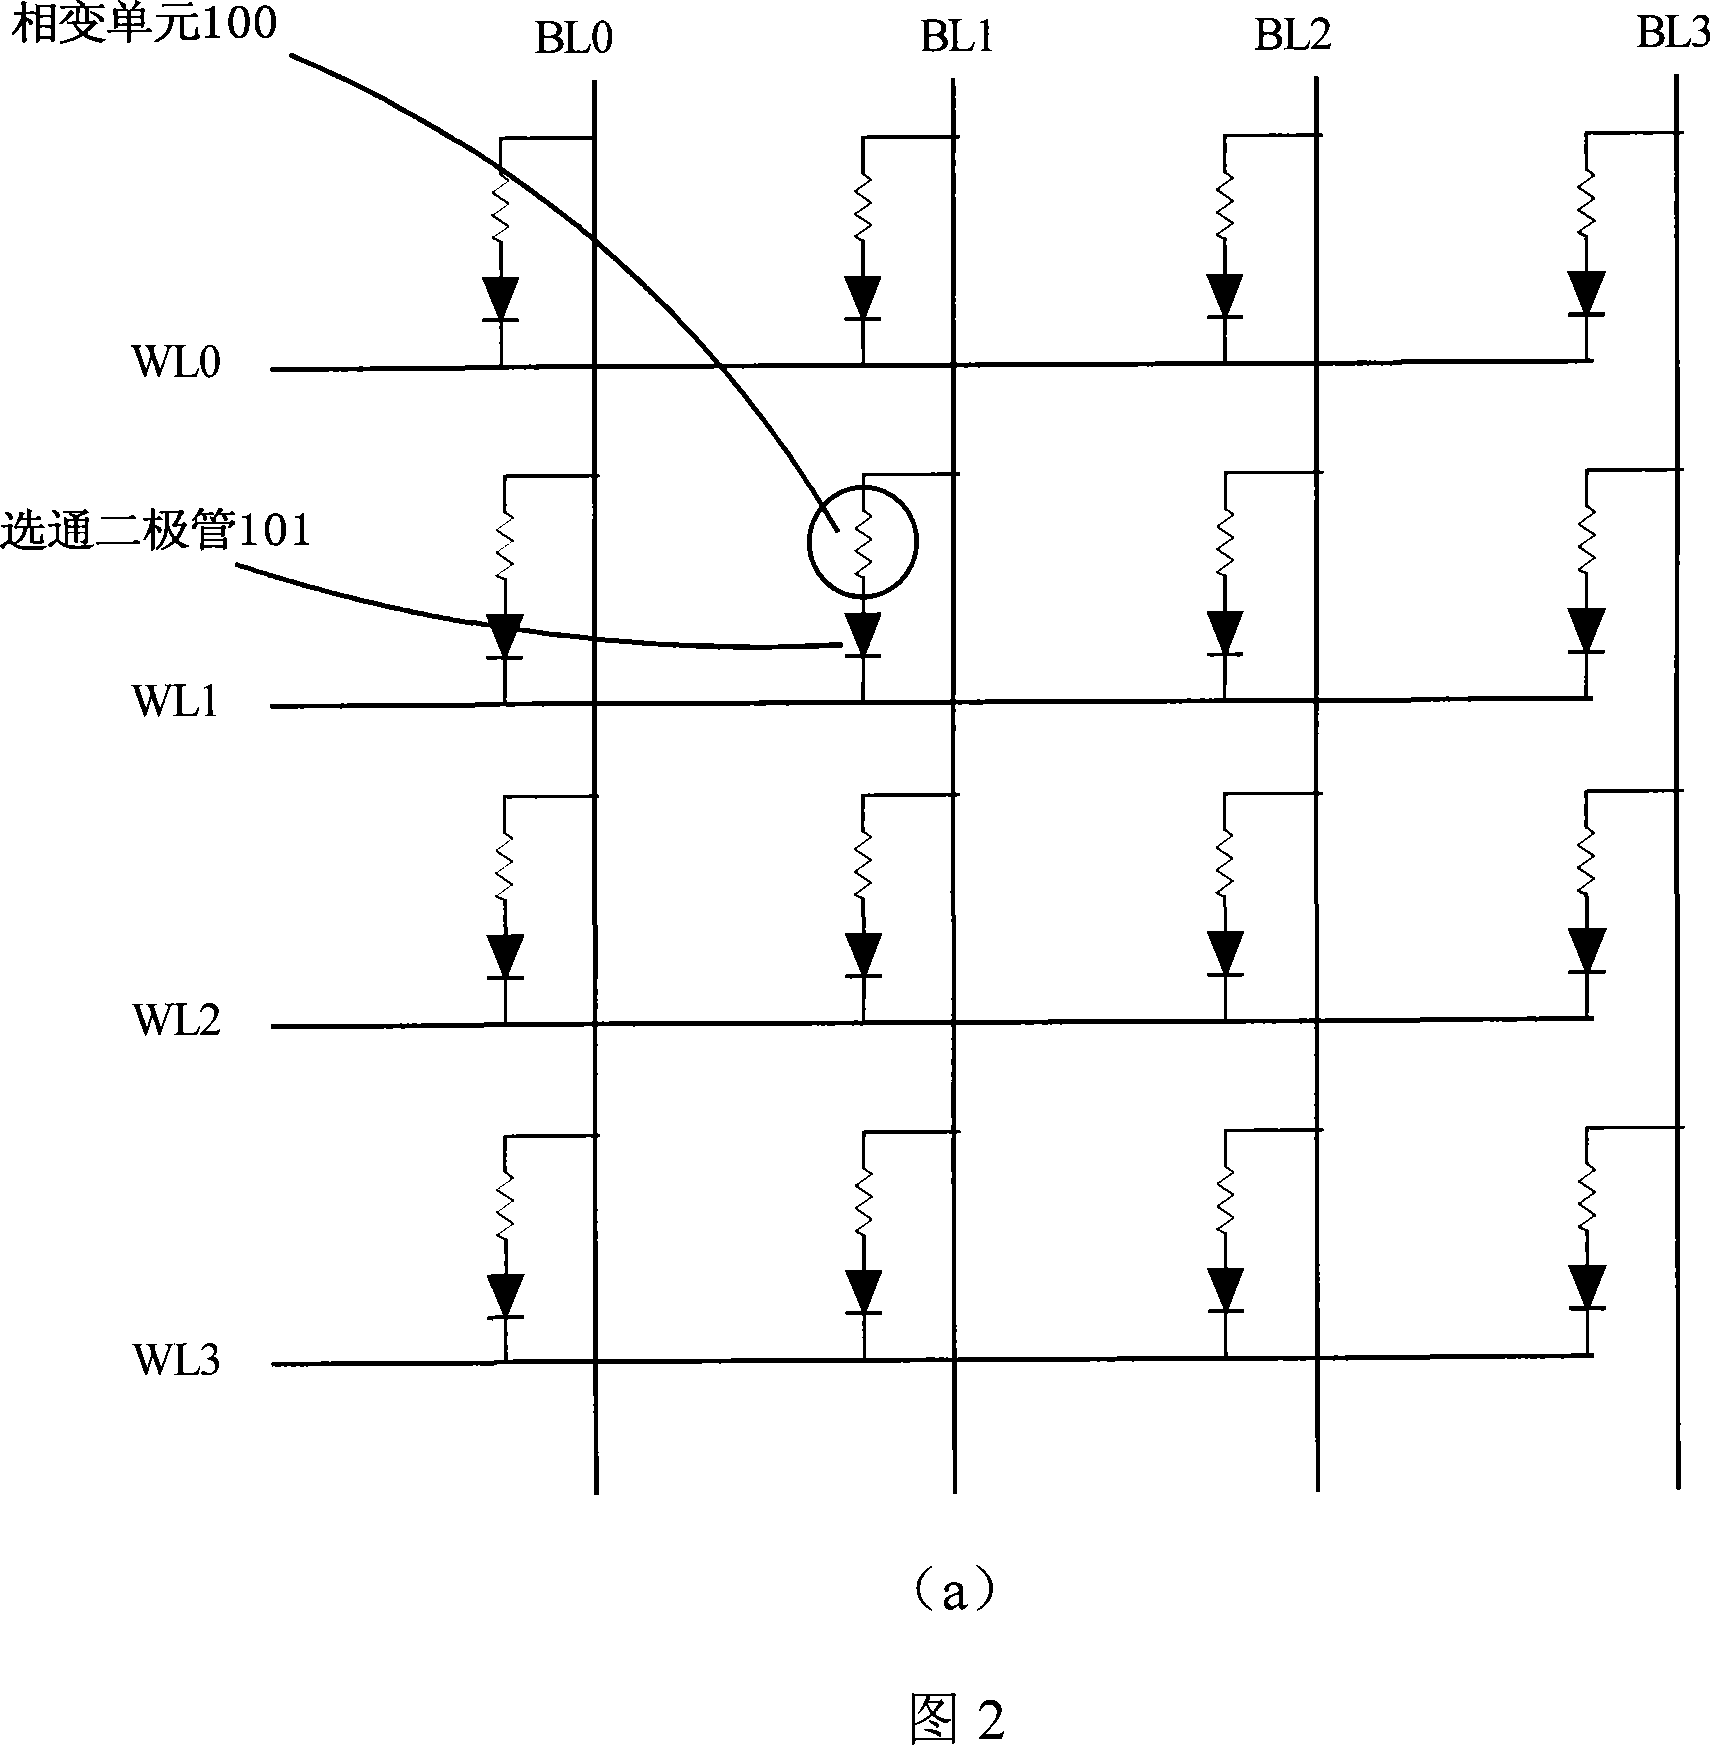 Circuit design standard and implementation method for 3-D solid structure phase change memory chip